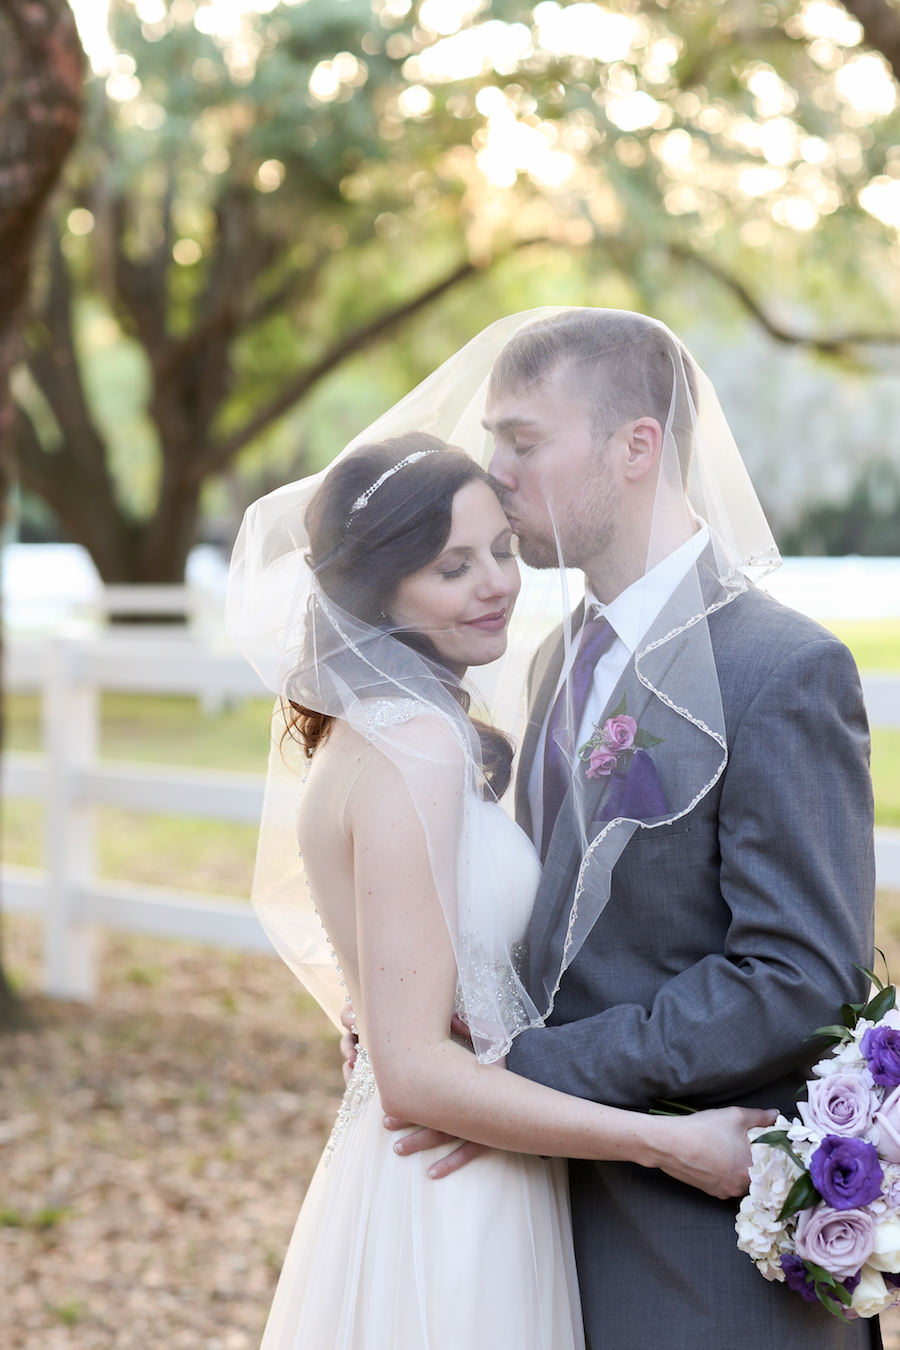 Bride and Groom Outdoor Wedding Portrait at Tampa Bay Wedding Venue The Lange Farm | Bride in Maggie Sottero Wedding Dress with Purple and Ivory Bouquet by Tampa Bay Wedding Florist Northside Florist